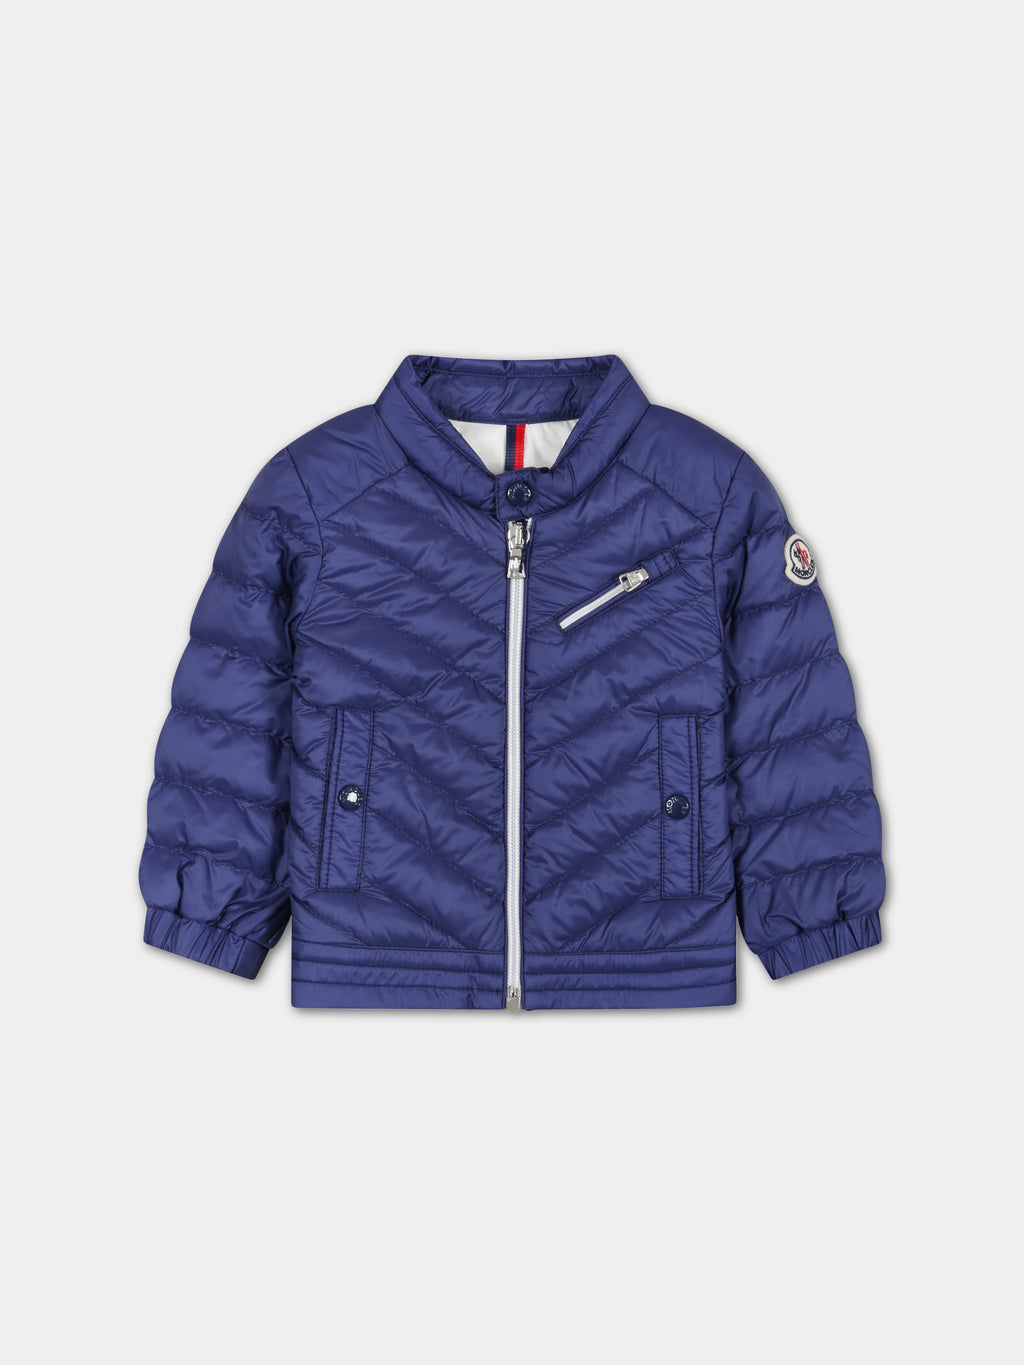 Blue jacket for baby boy with logo patch